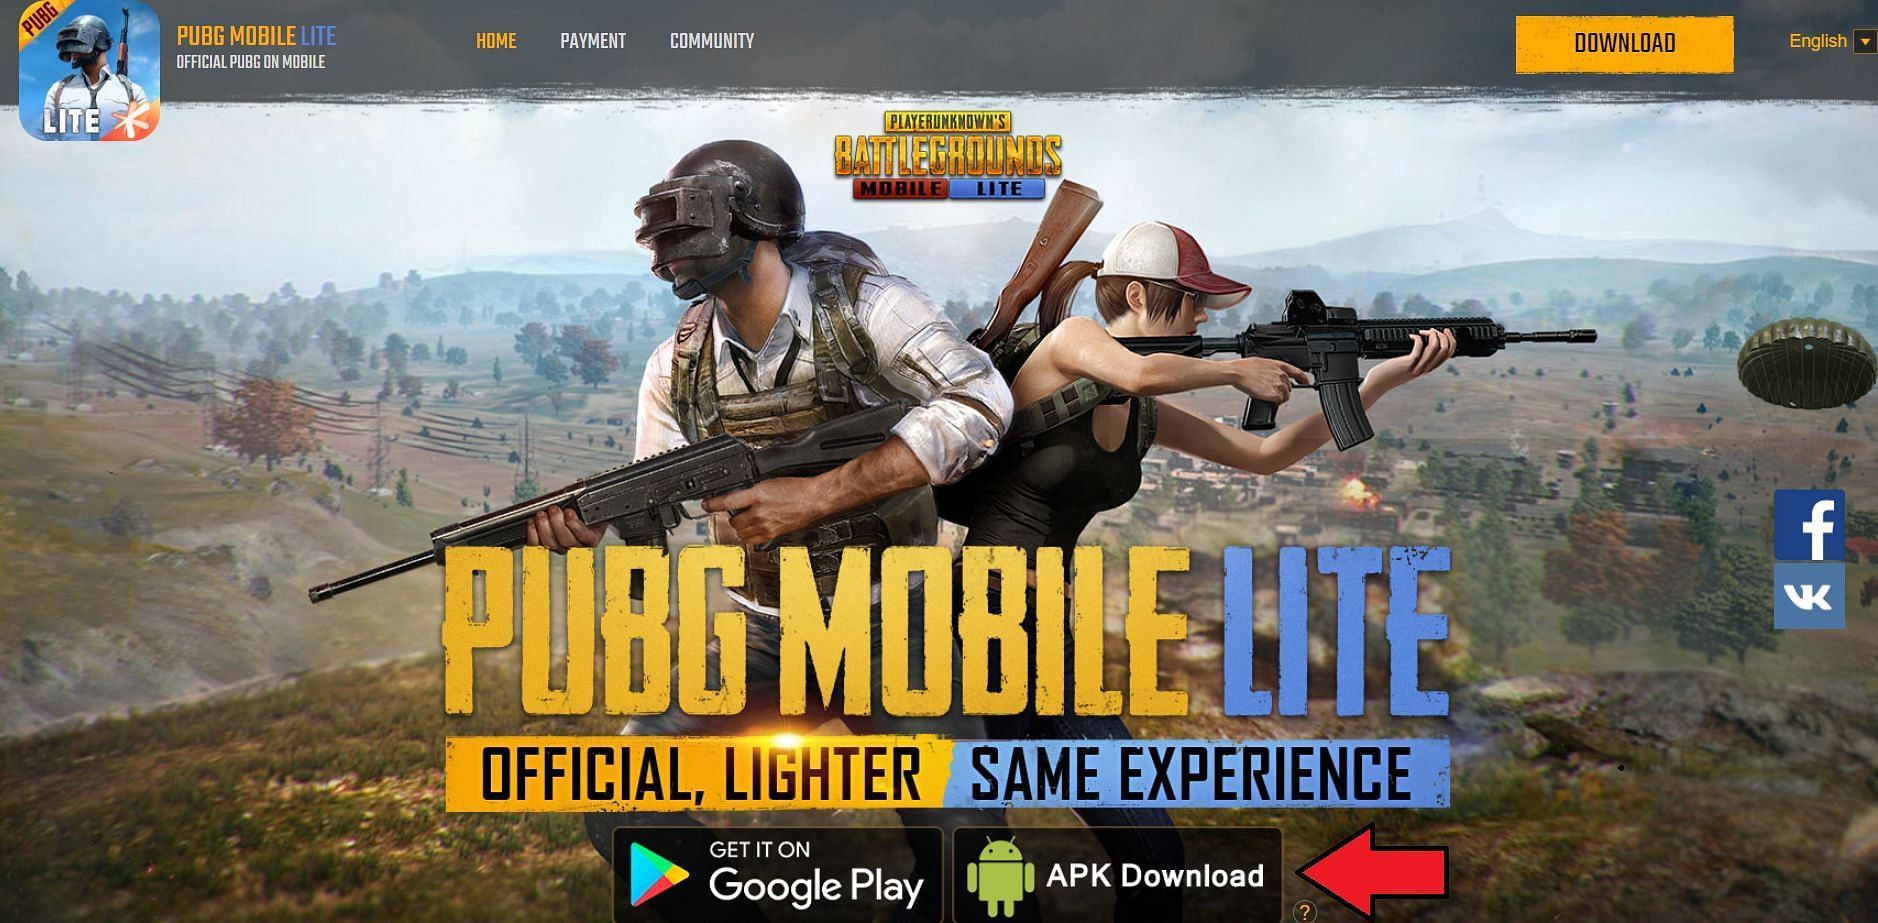 Clicking on this icon will initiate the download of the APK file (Image via PUBG Mobile Lite)